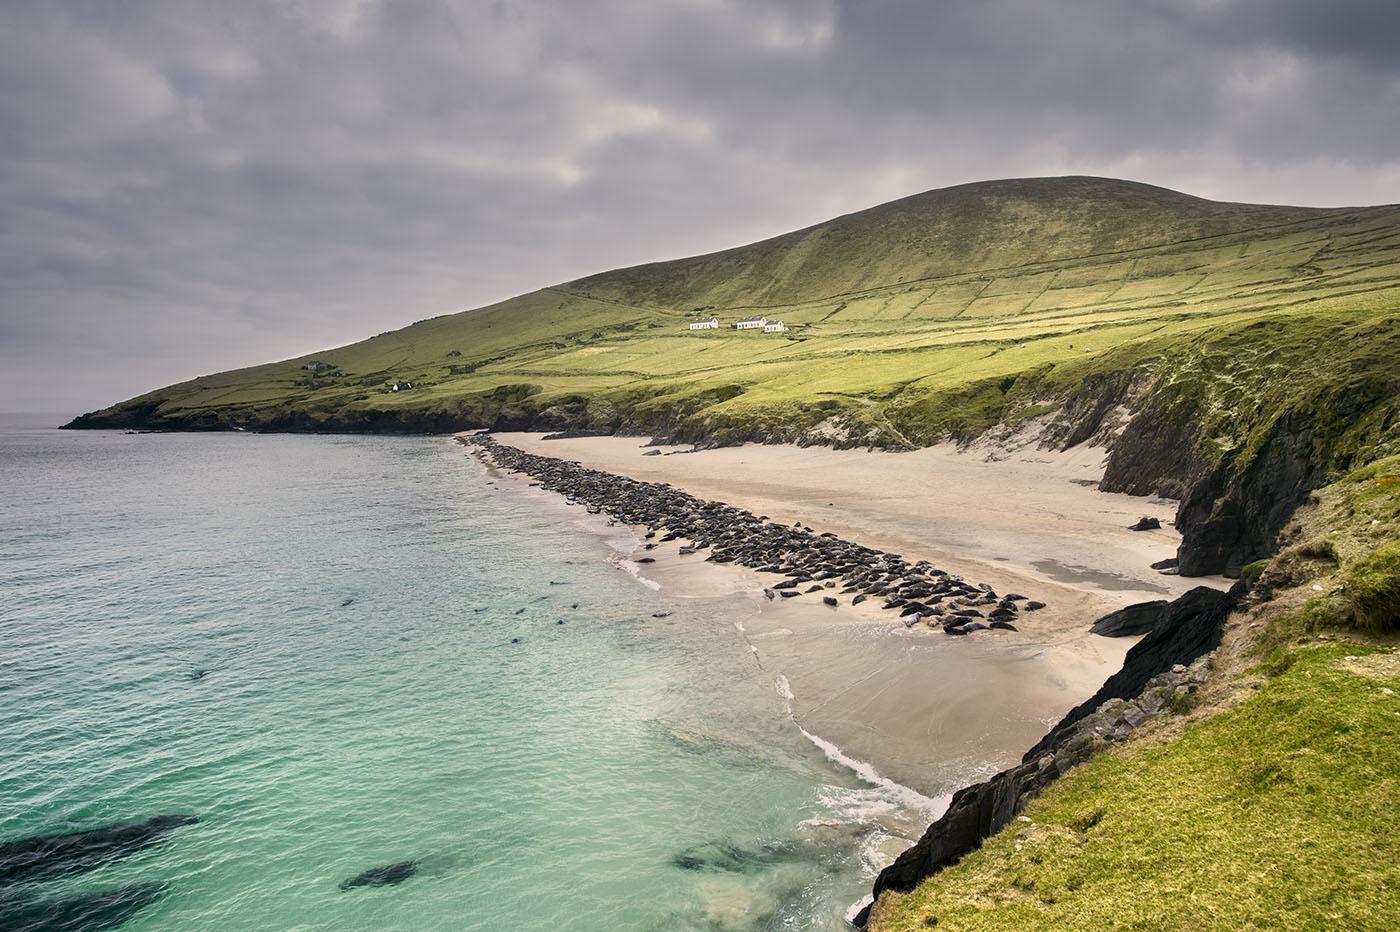 A basking colony of grey seals on one of the Blasket Islands. Photo: George Karbus